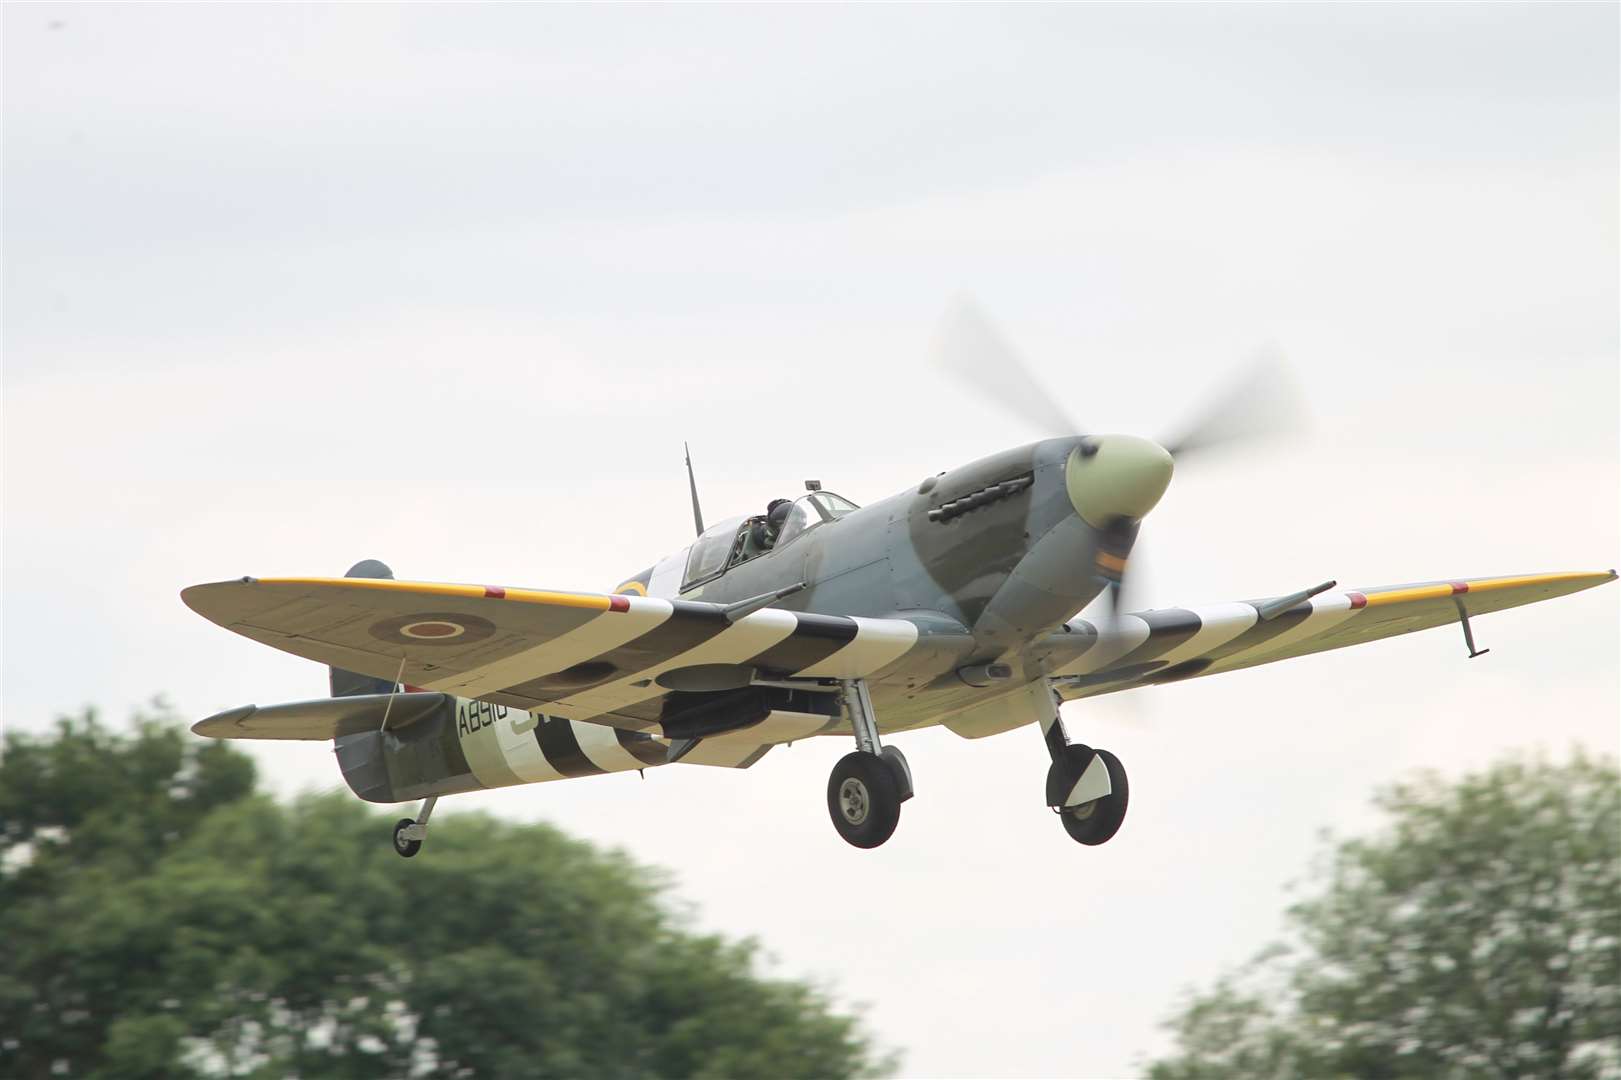 A Spitfire takes off during The Battle of Britain Air Show at Headcorn Aerodrome. Picture: John Westhrop